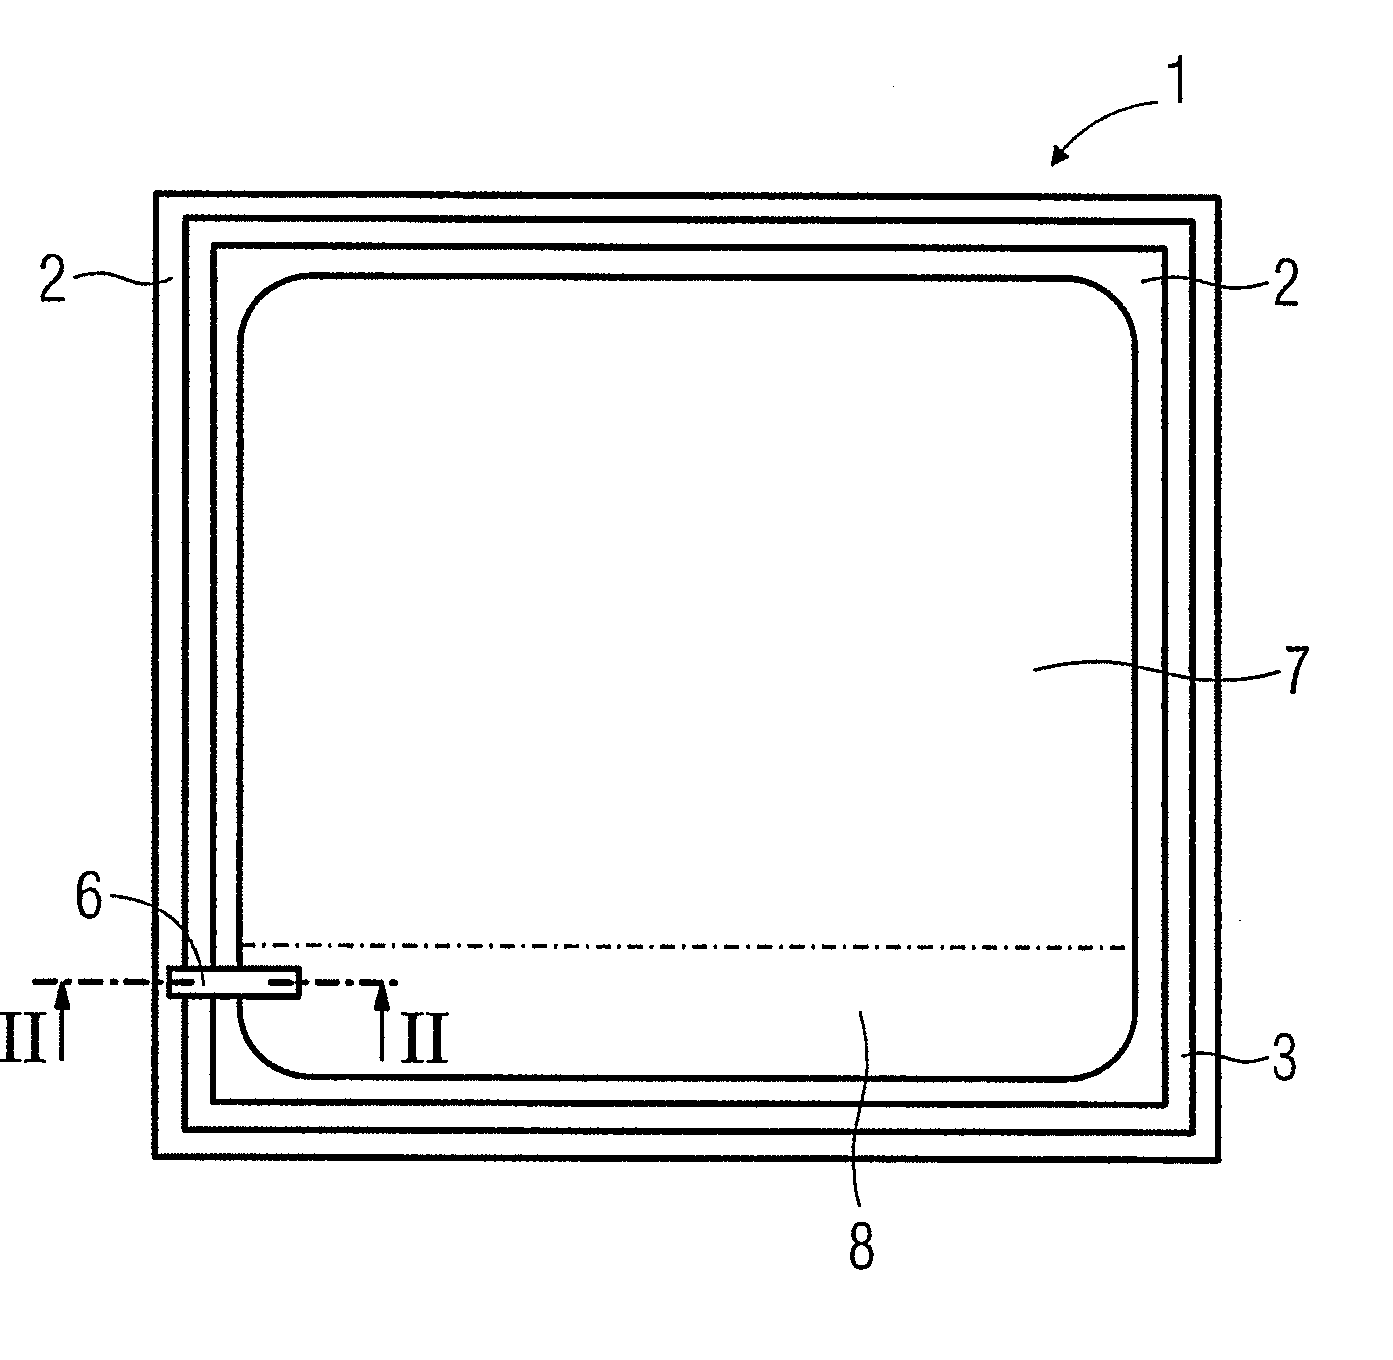 Image display unit with sensor device mounted to frame